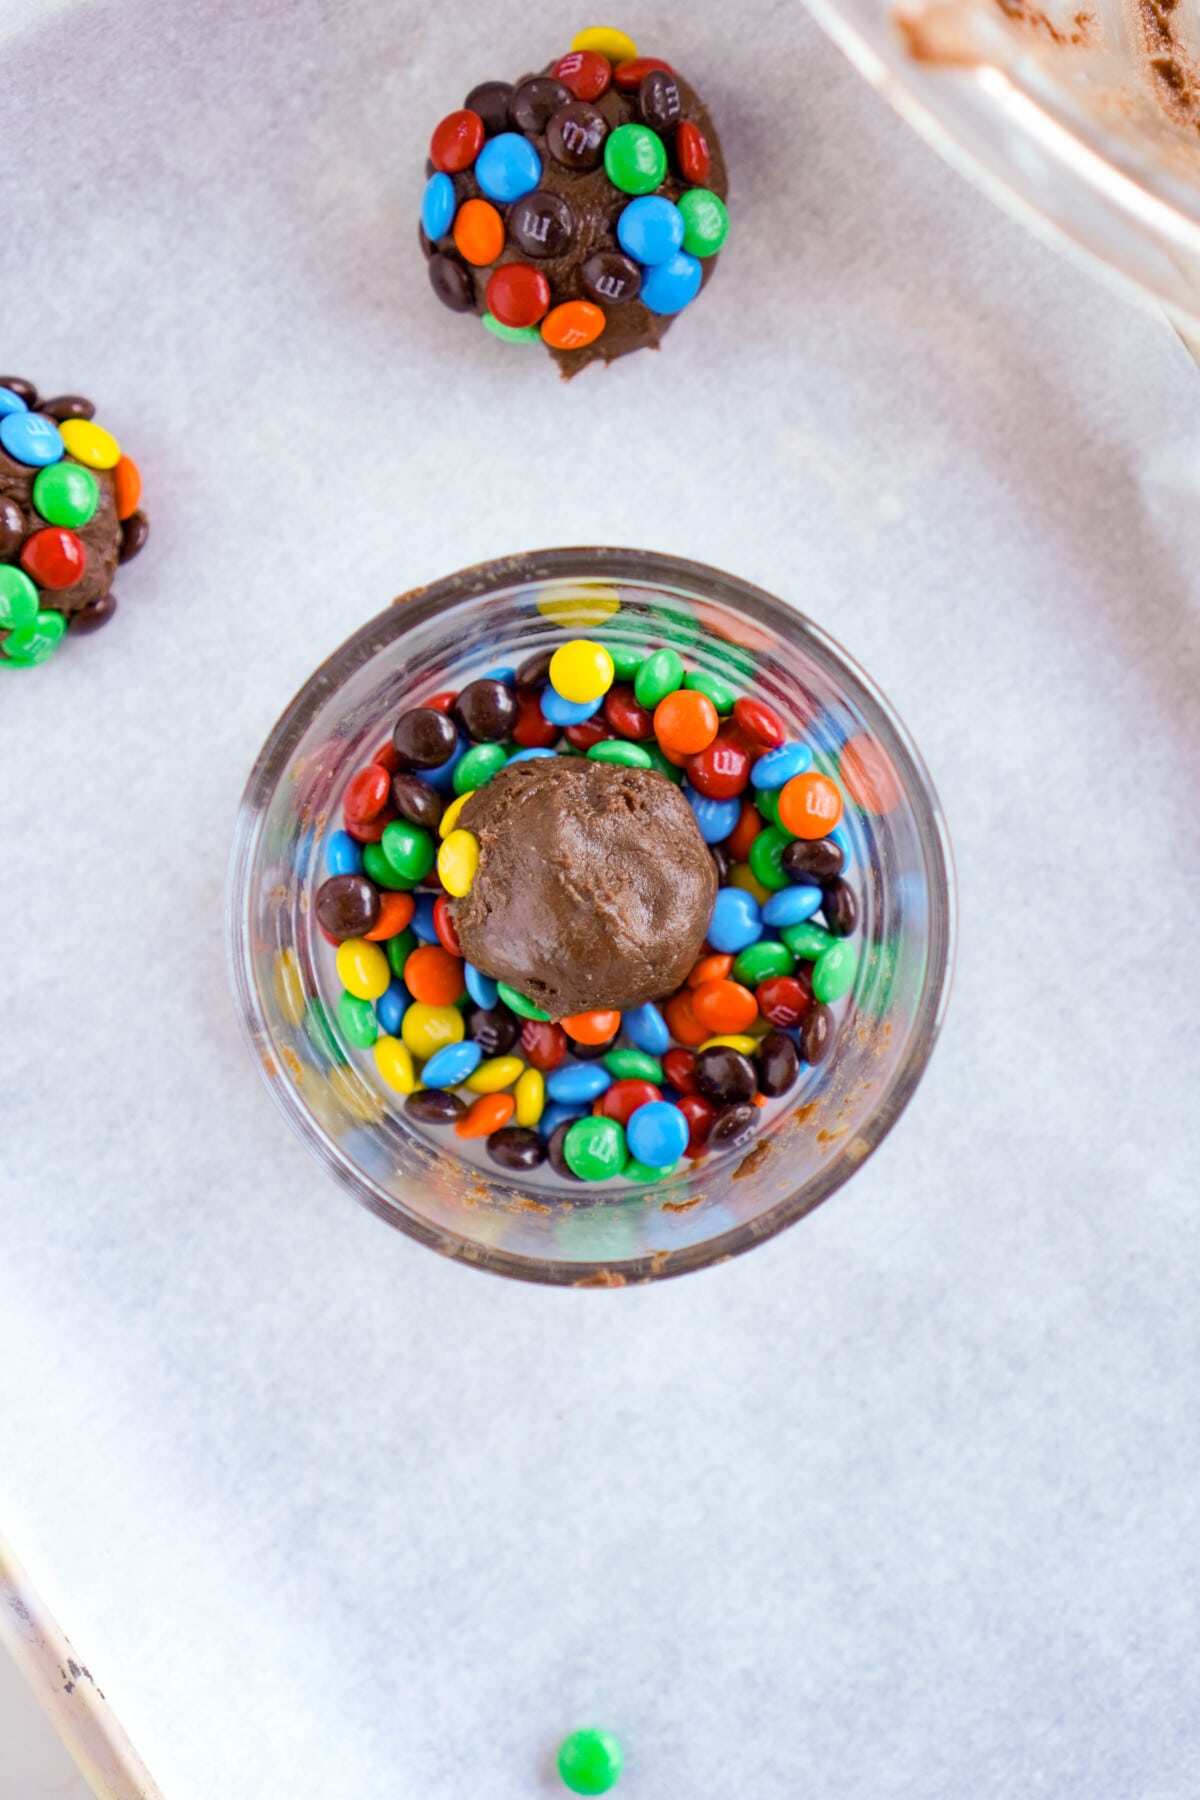 Rolling the dough in M&M's.